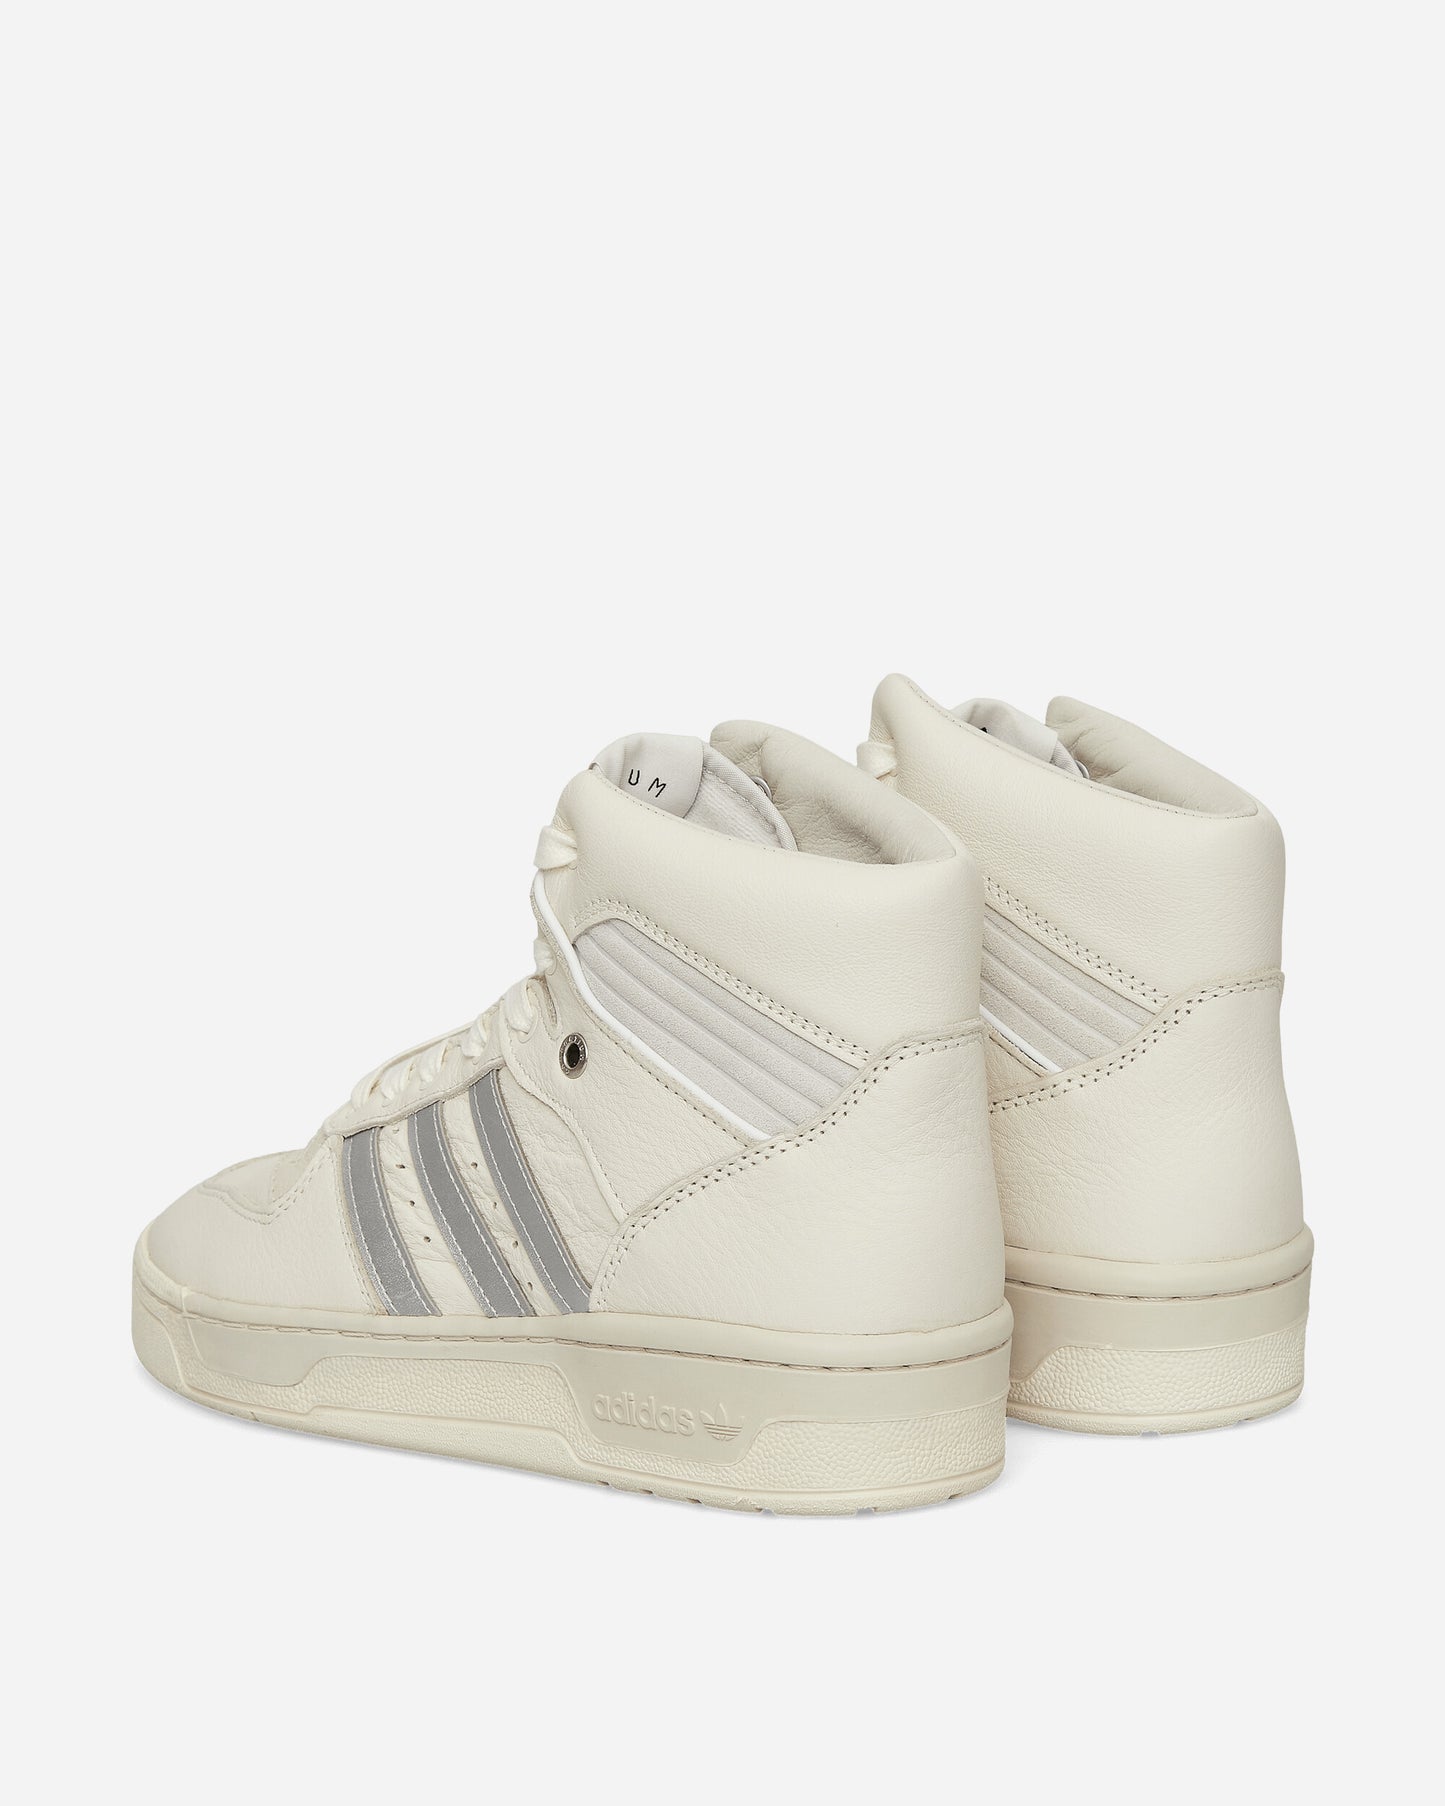 adidas Rivalry Hi Consortium Chalk White/Silver Met Sneakers Mid IF0602 001